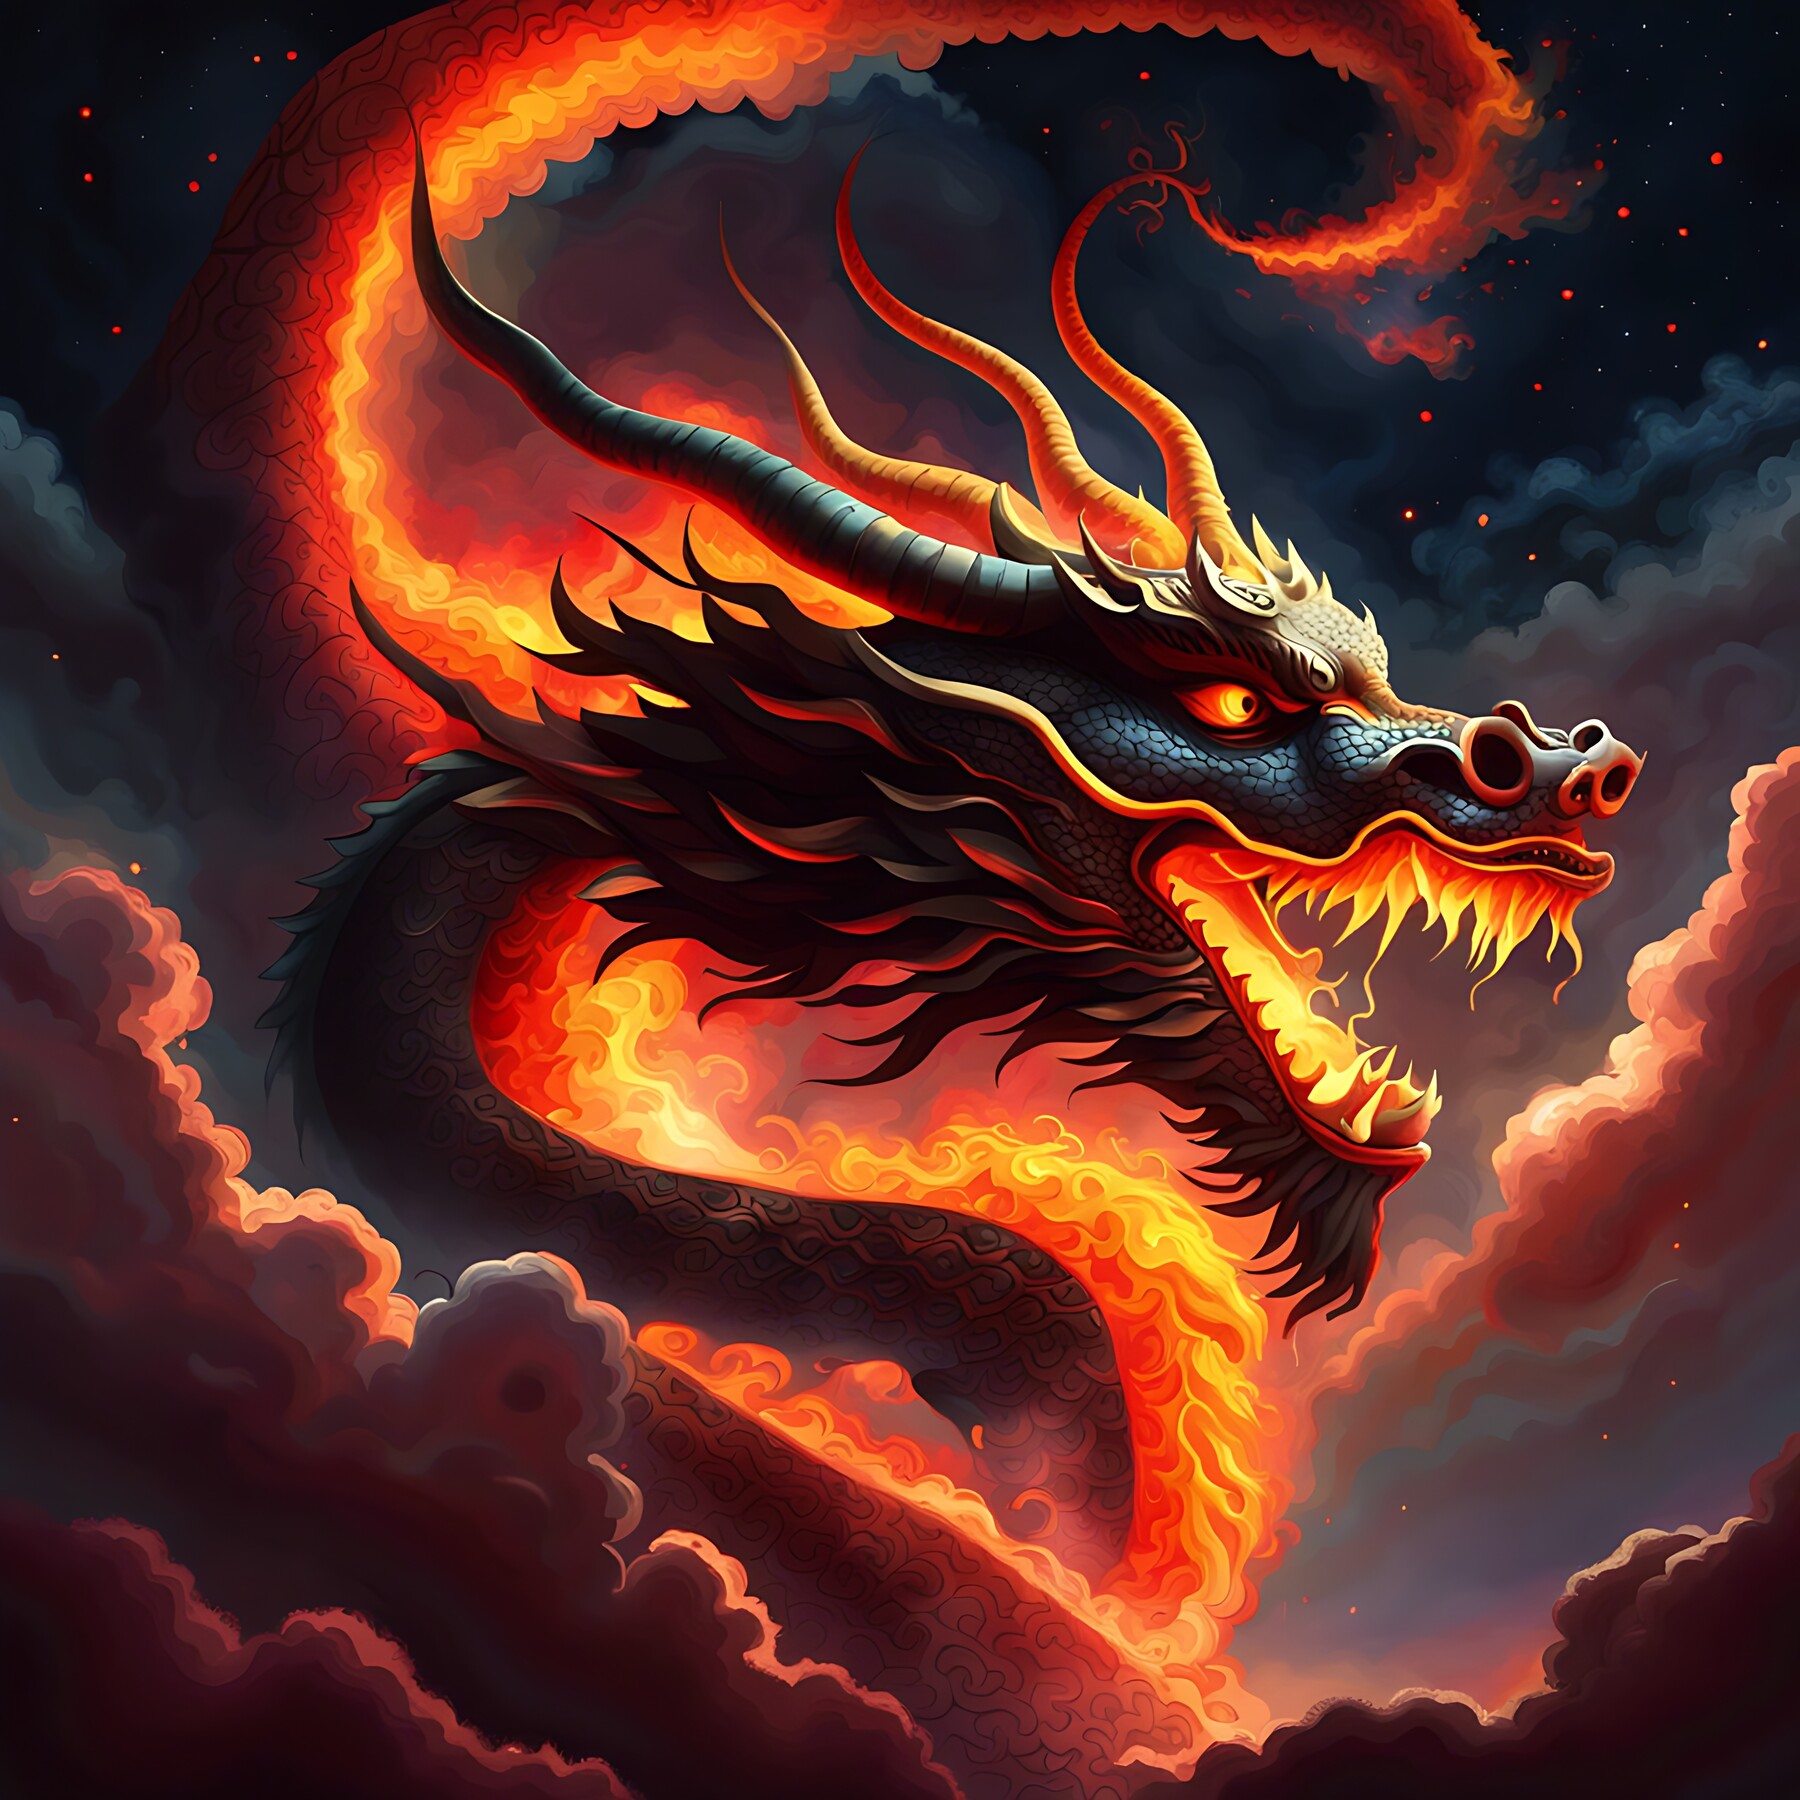 ArtStation - Package of 10 ai art of Chines dragons in the sky | Artworks